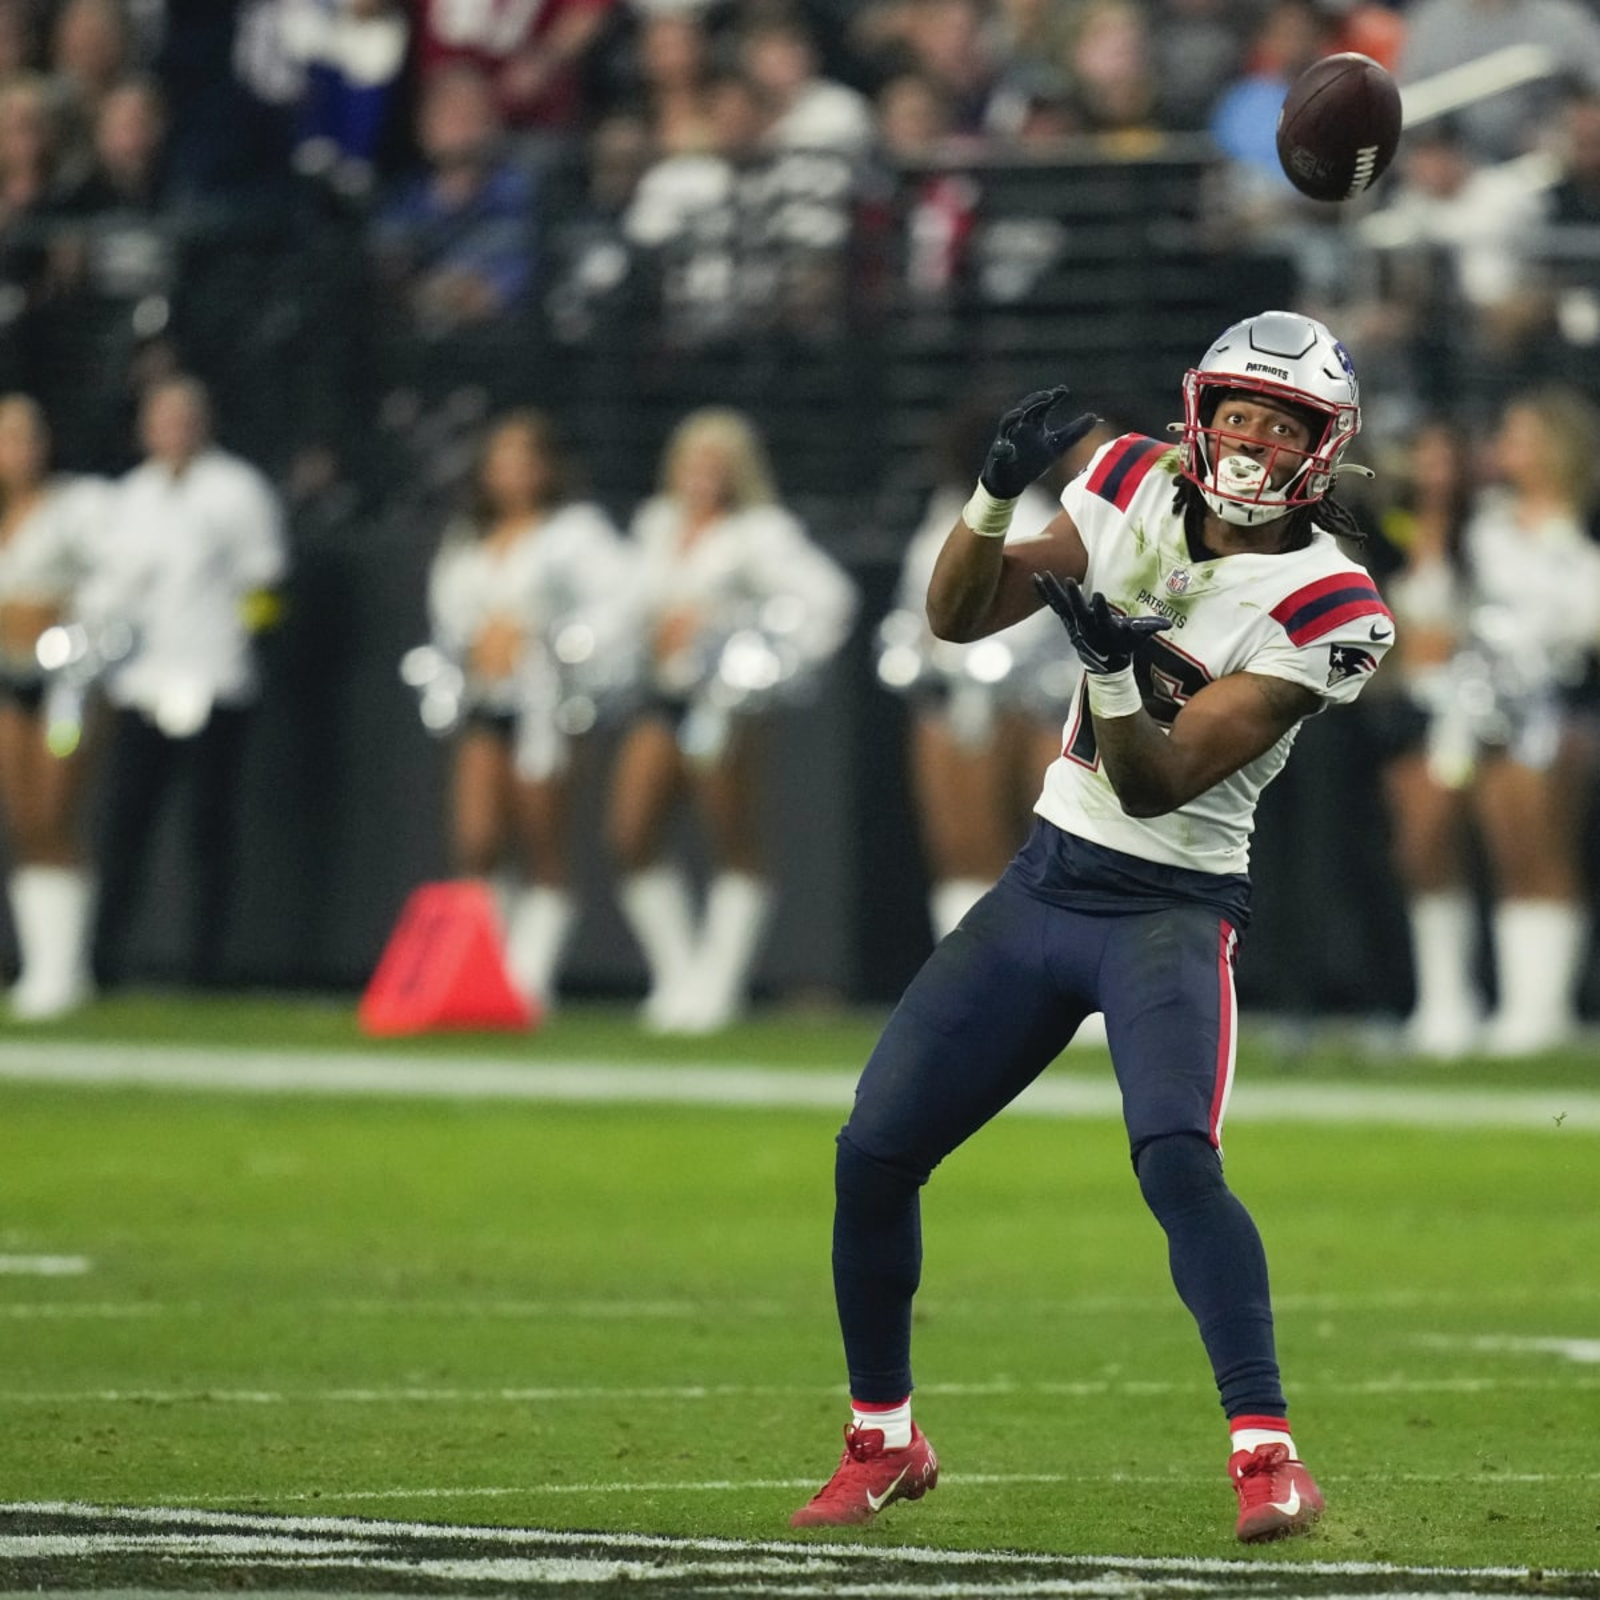 Jakobi Meyers got his chance with Patriots and ran with it